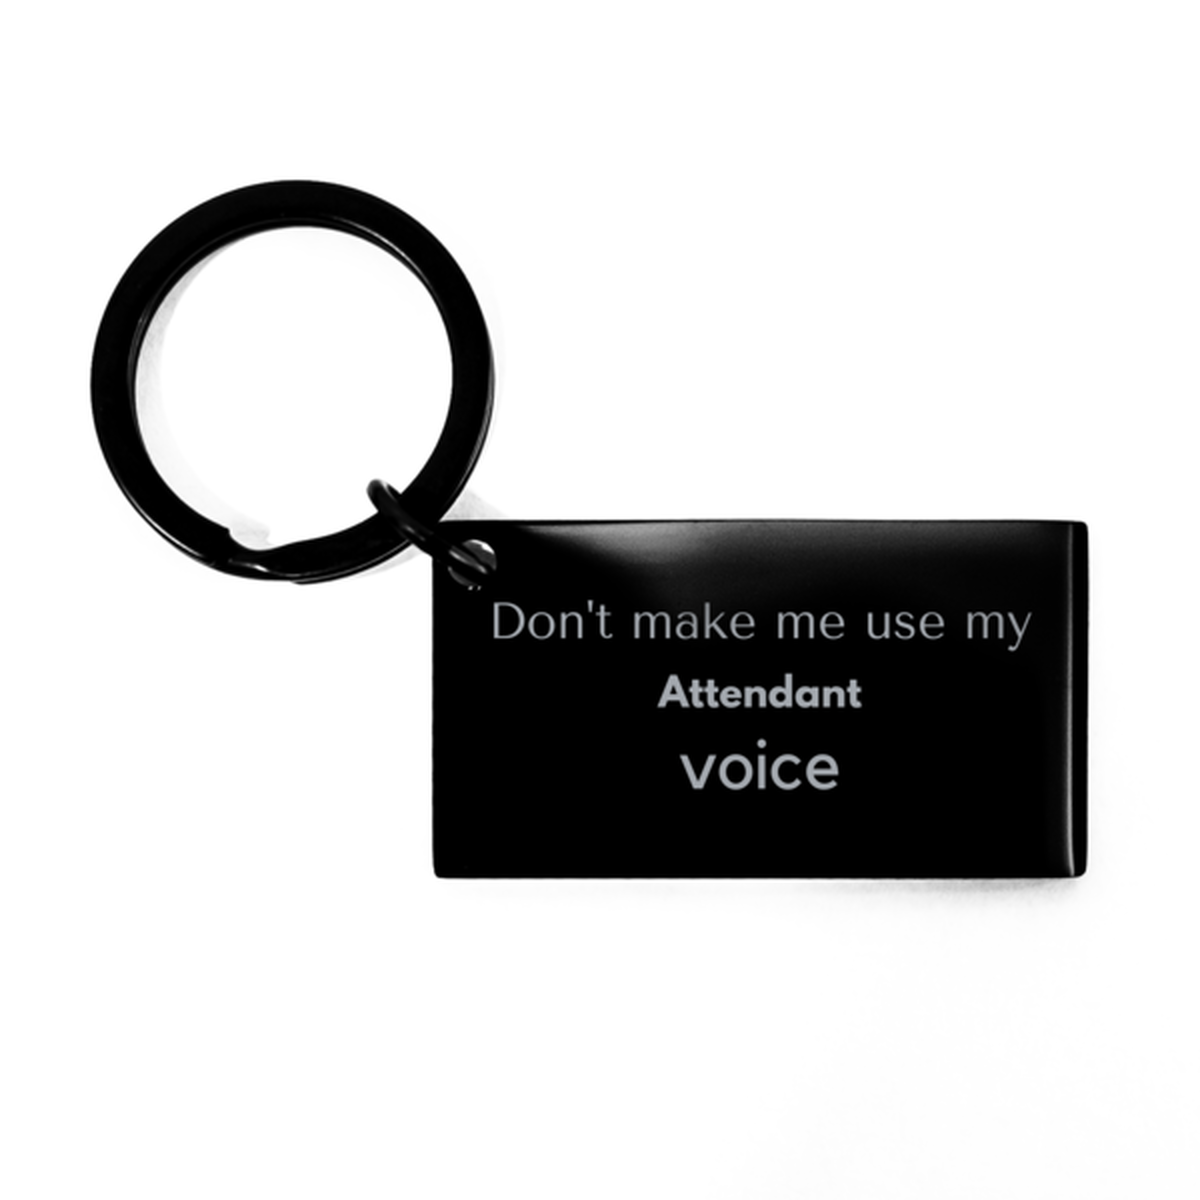 Don't make me use my Attendant voice, Sarcasm Attendant Gifts, Christmas Attendant Keychain Birthday Unique Gifts For Attendant Coworkers, Men, Women, Colleague, Friends